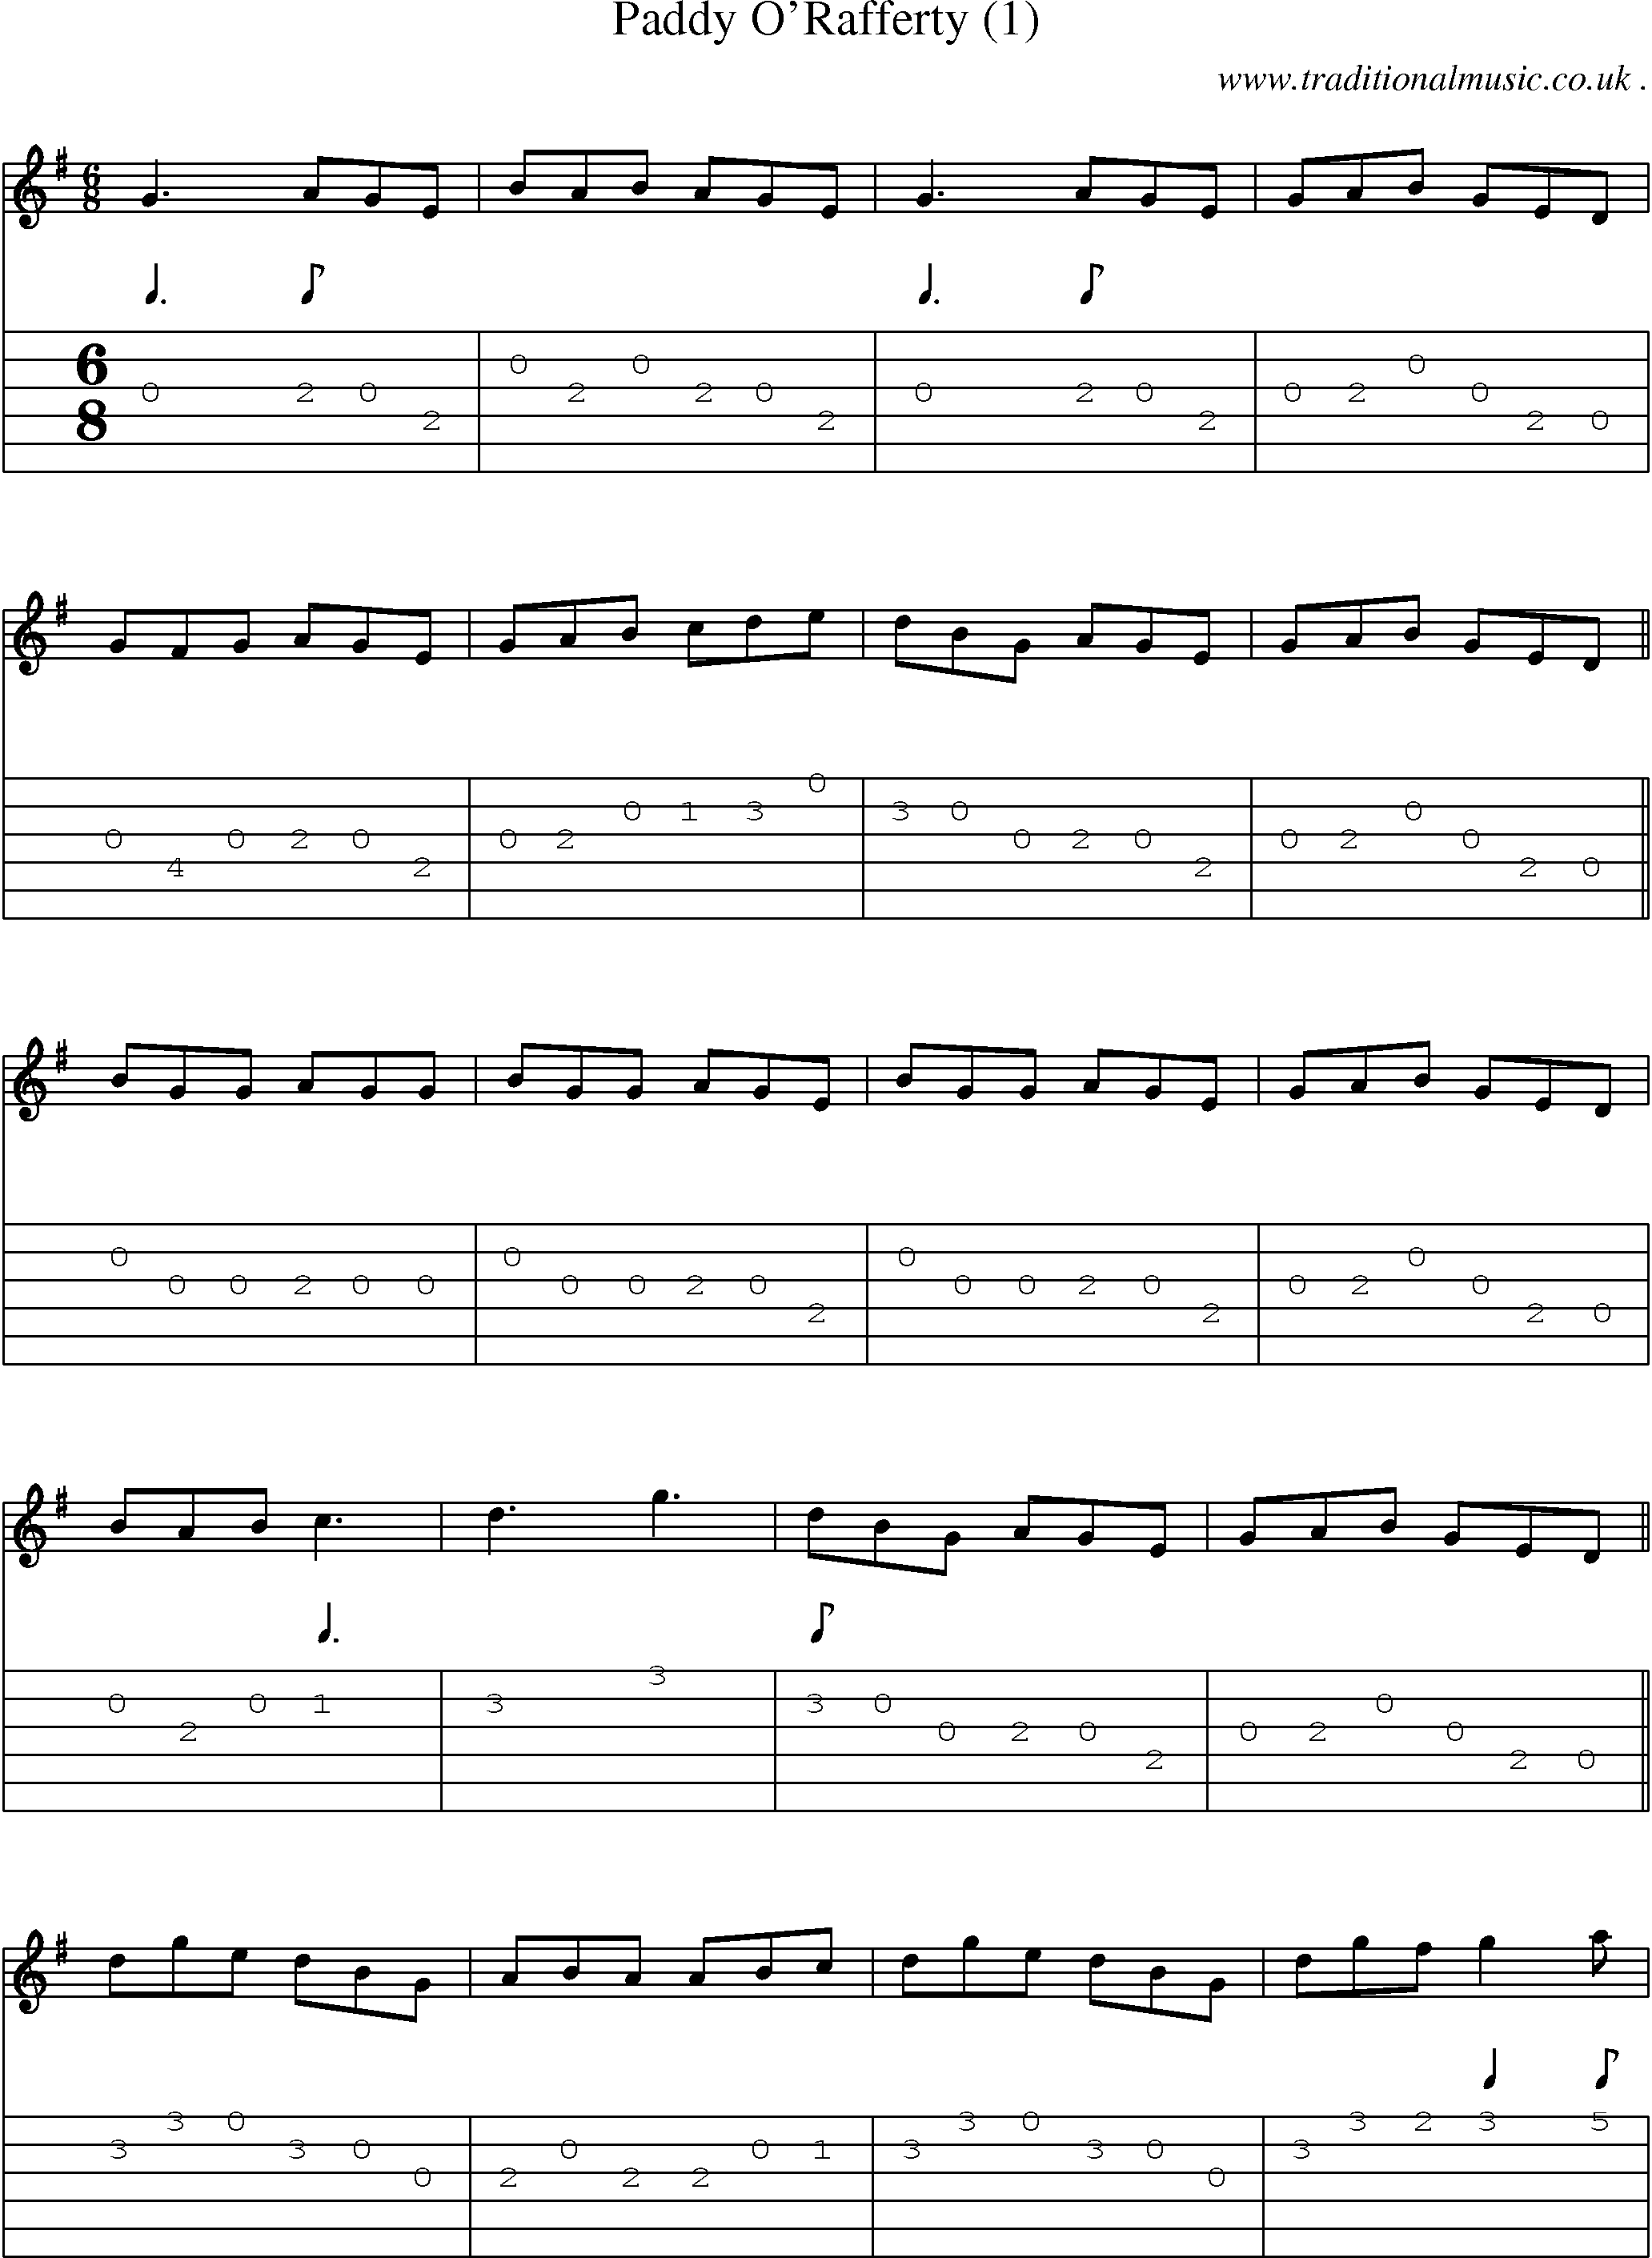 Sheet-Music and Guitar Tabs for Paddy Orafferty (1)